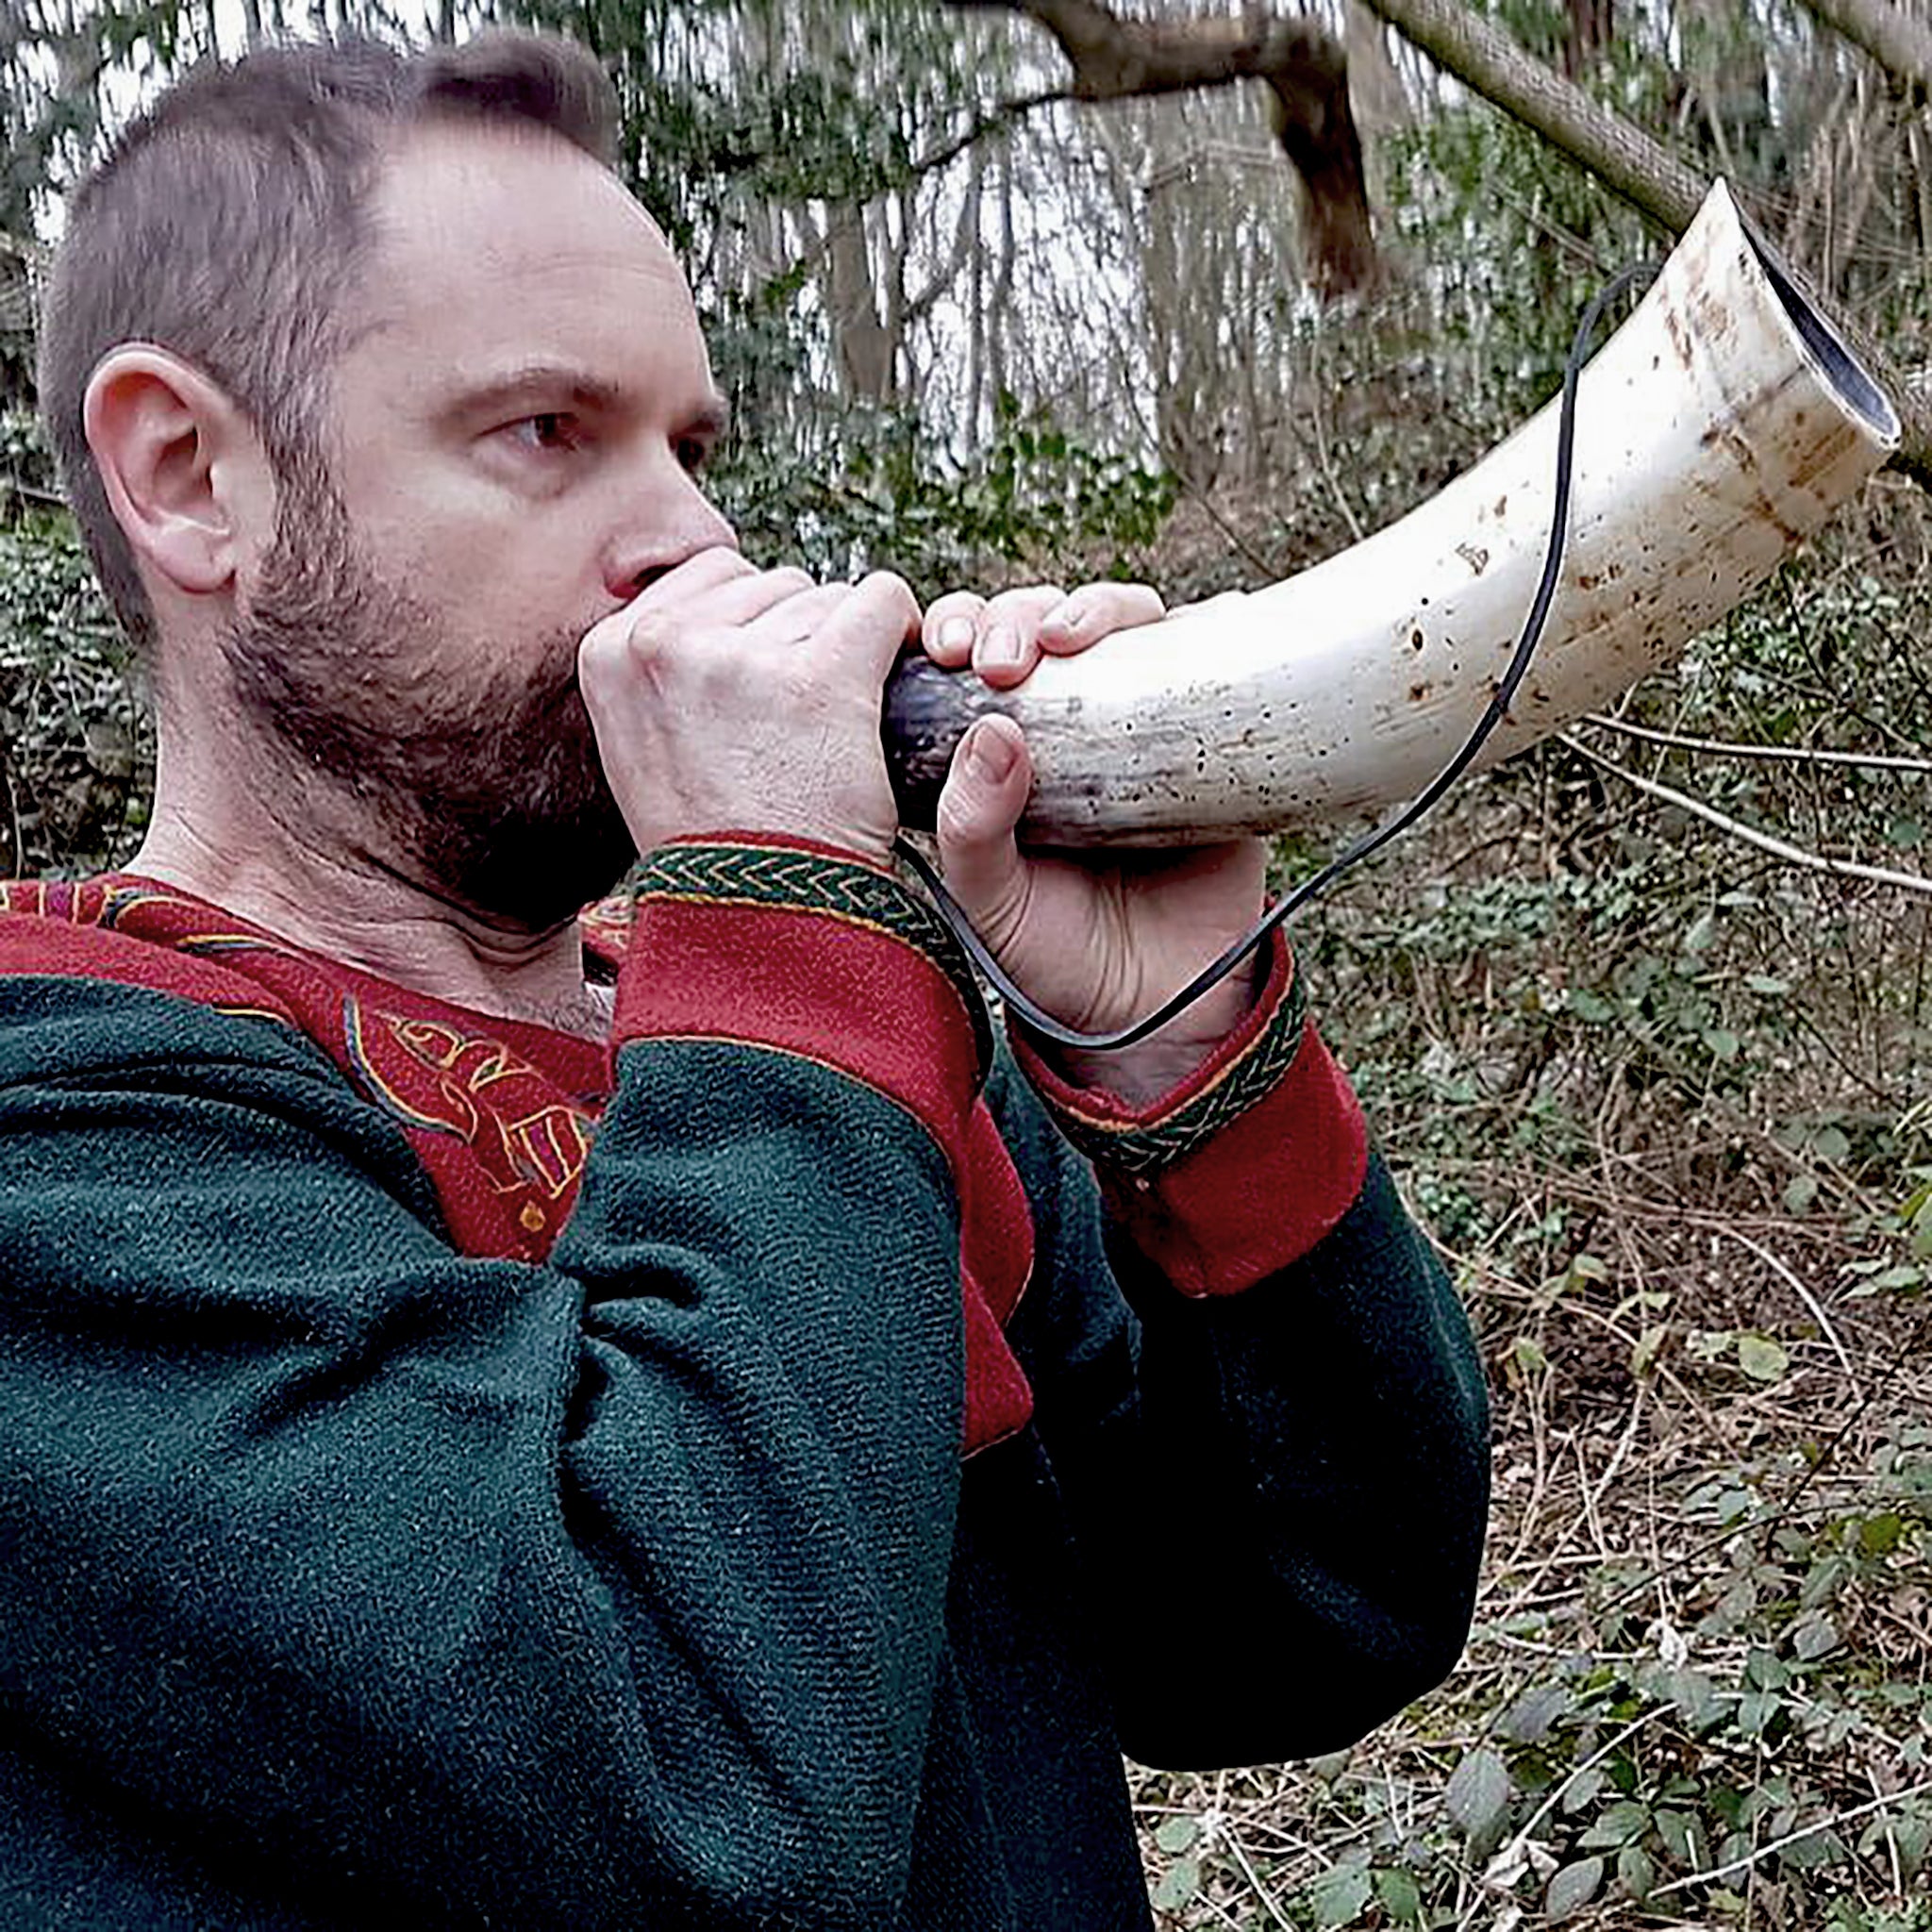 Me Blowing a Medium Viking Blowing Horn / Bugle in the Woods